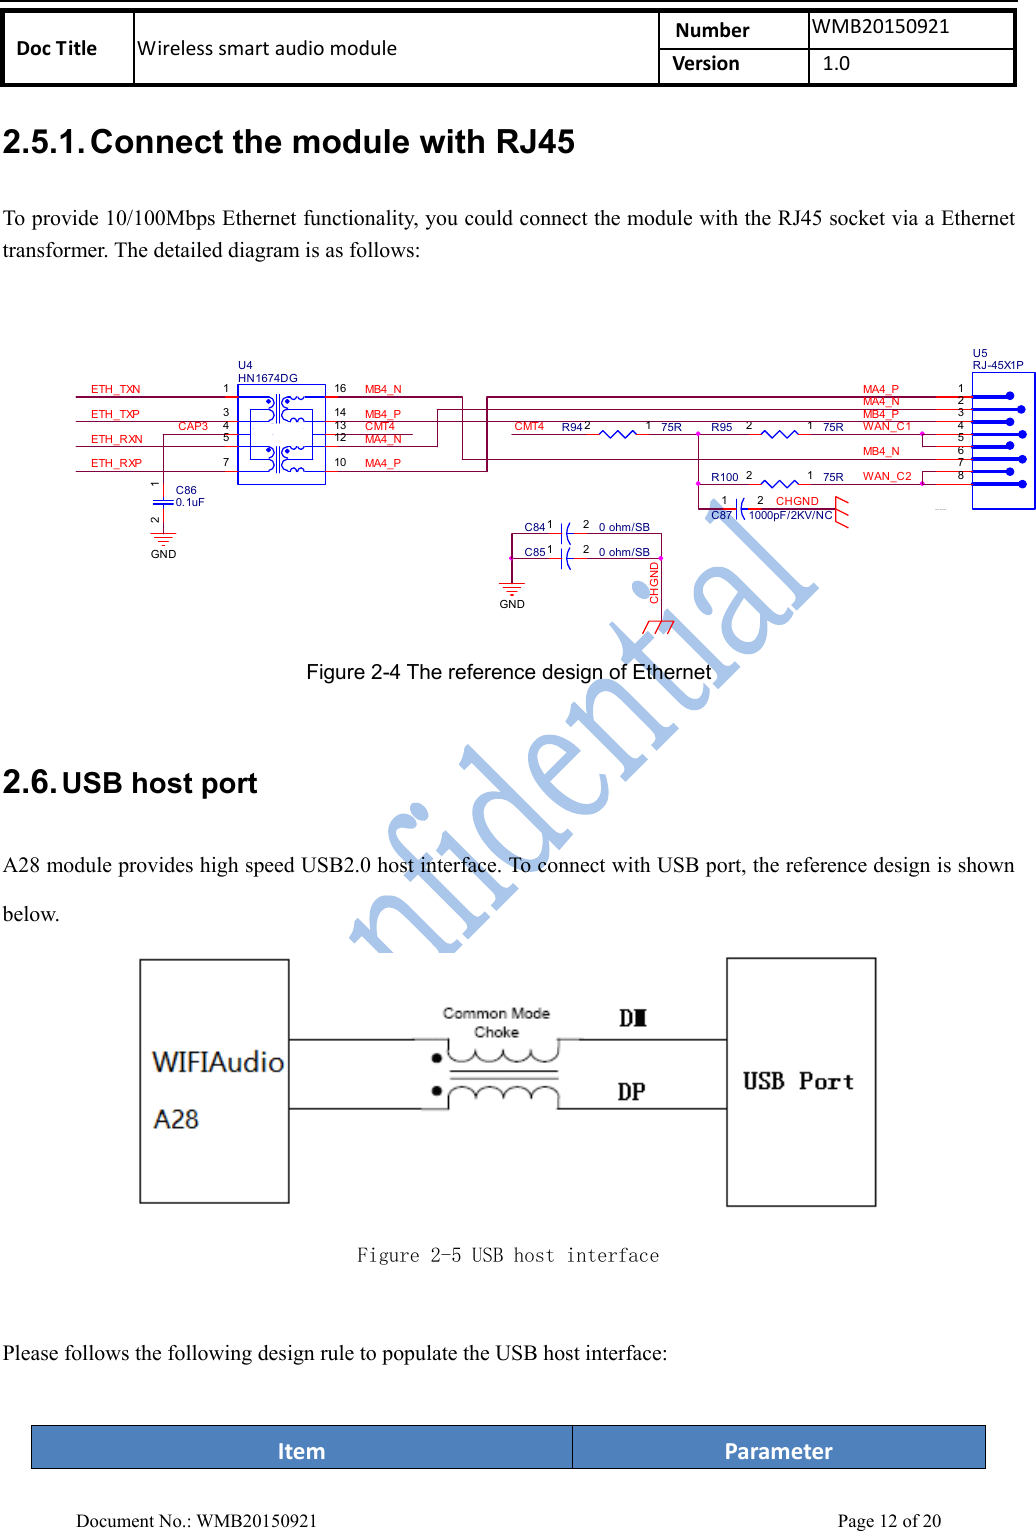    DocTitle Wirelesssmartaudiomodule Number WMB20150921Version 1.0 Document No.: WMB20150921    Page 12 of 20 2.5.1. Connect the module with RJ45   To provide 10/100Mbps Ethernet functionality, you could connect the module with the RJ45 socket via a Ethernet transformer. The detailed diagram is as follows:   R100 75R12R95 75R12GNDU5RJ-45X1P12364578CHGNDC84 0 ohm/SB1 2GNDC85 0 ohm/SB1 2WAN_C2ETH_RXPETH_RXNWAN_C1ETH_TXPETH_TXNMB4_P MB4_PLAN PORT1MA4_PCAP3 CMT4CHGNDMA4_NMB4_NMA4_NMA4_PCMT4MB4_NC860.1uF12RXTXD XU4HN1674DG135716141312104R94 75R12C87 1000pF/2KV/NC1 2 Figure 2-4 The reference design of Ethernet  2.6. USB host port  A28 module provides high speed USB2.0 host interface. To connect with USB port, the reference design is shown below.    Figure 2-5 USB host interface  Please follows the following design rule to populate the USB host interface:    Item Parameter